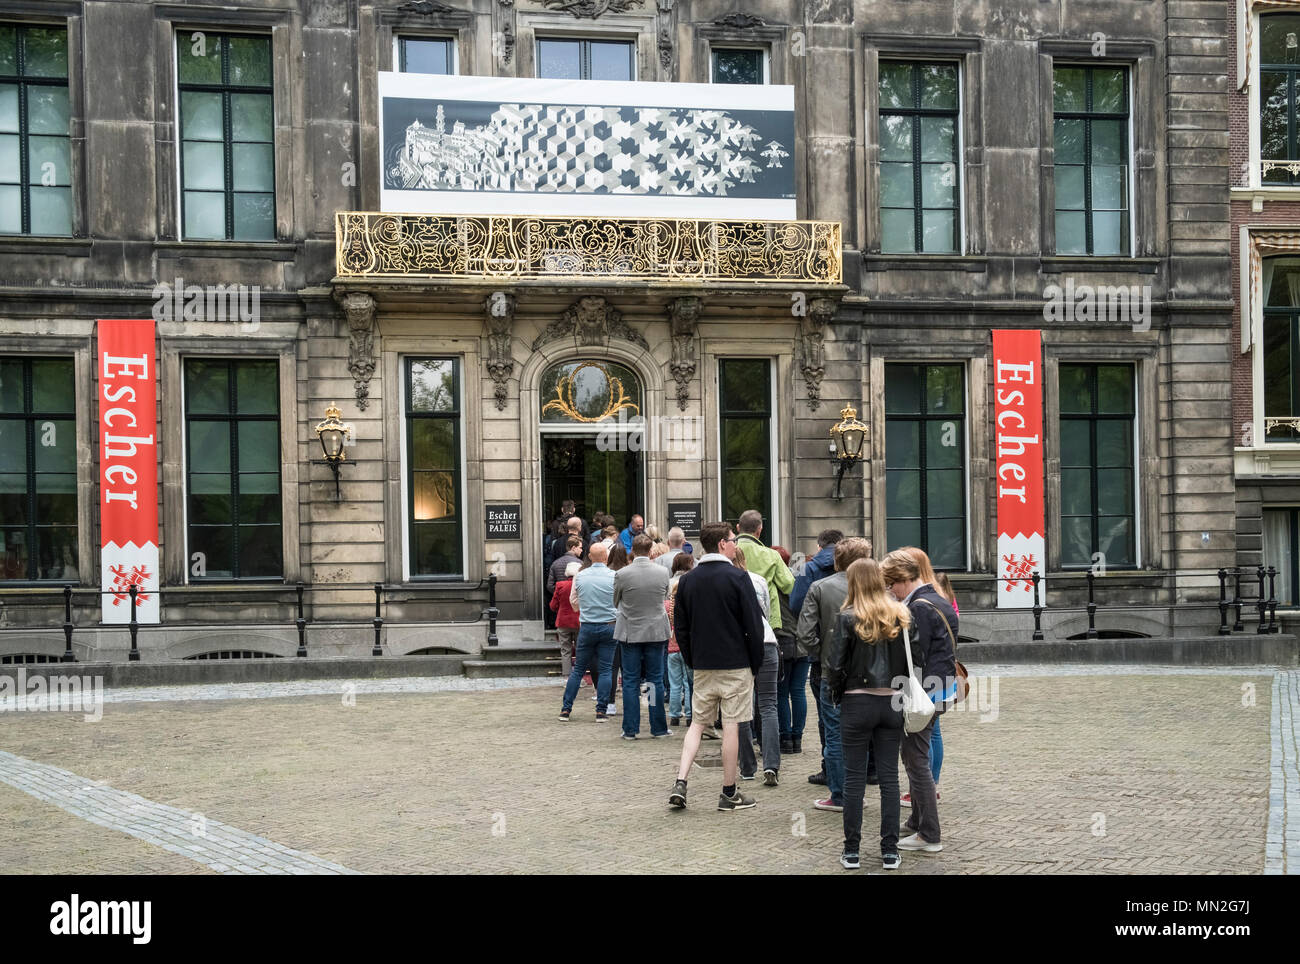 People queue outside the entrance to Escher in Het Paleis, to see works by Dutch artist M.C. Escher, Lange Voorhout Palace, The Hague, Netherlands. Stock Photo